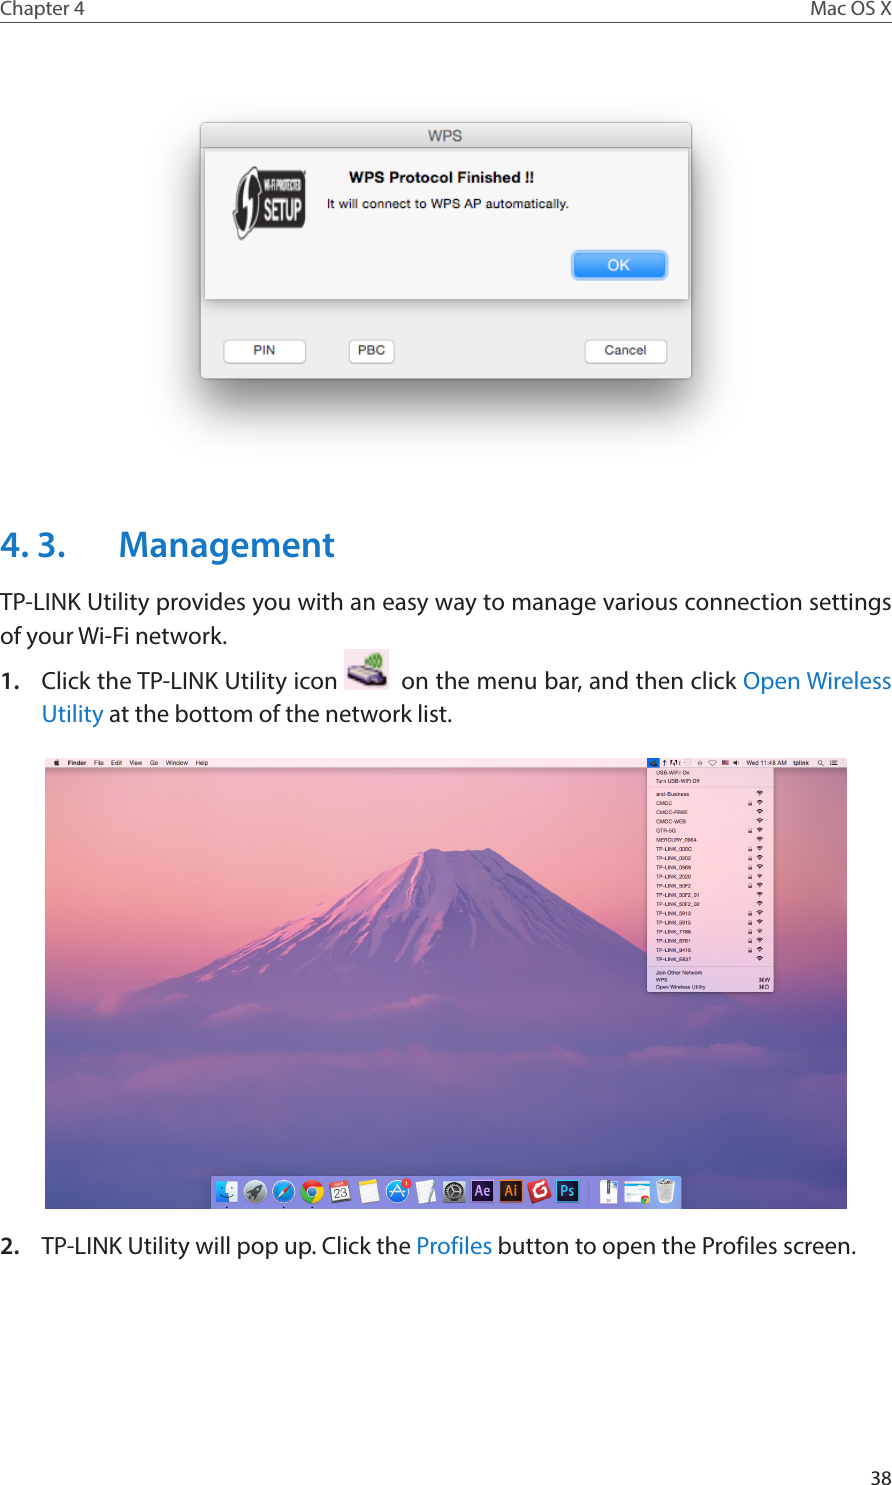 38Chapter 4 Mac OS X4. 3.  ManagementTP-LINK Utility provides you with an easy way to manage various connection settings of your Wi-Fi network.1.  Click the TP-LINK Utility icon    on the menu bar, and then click Open Wireless Utility at the bottom of the network list.2.  TP-LINK Utility will pop up. Click the Profiles button to open the Profiles screen.